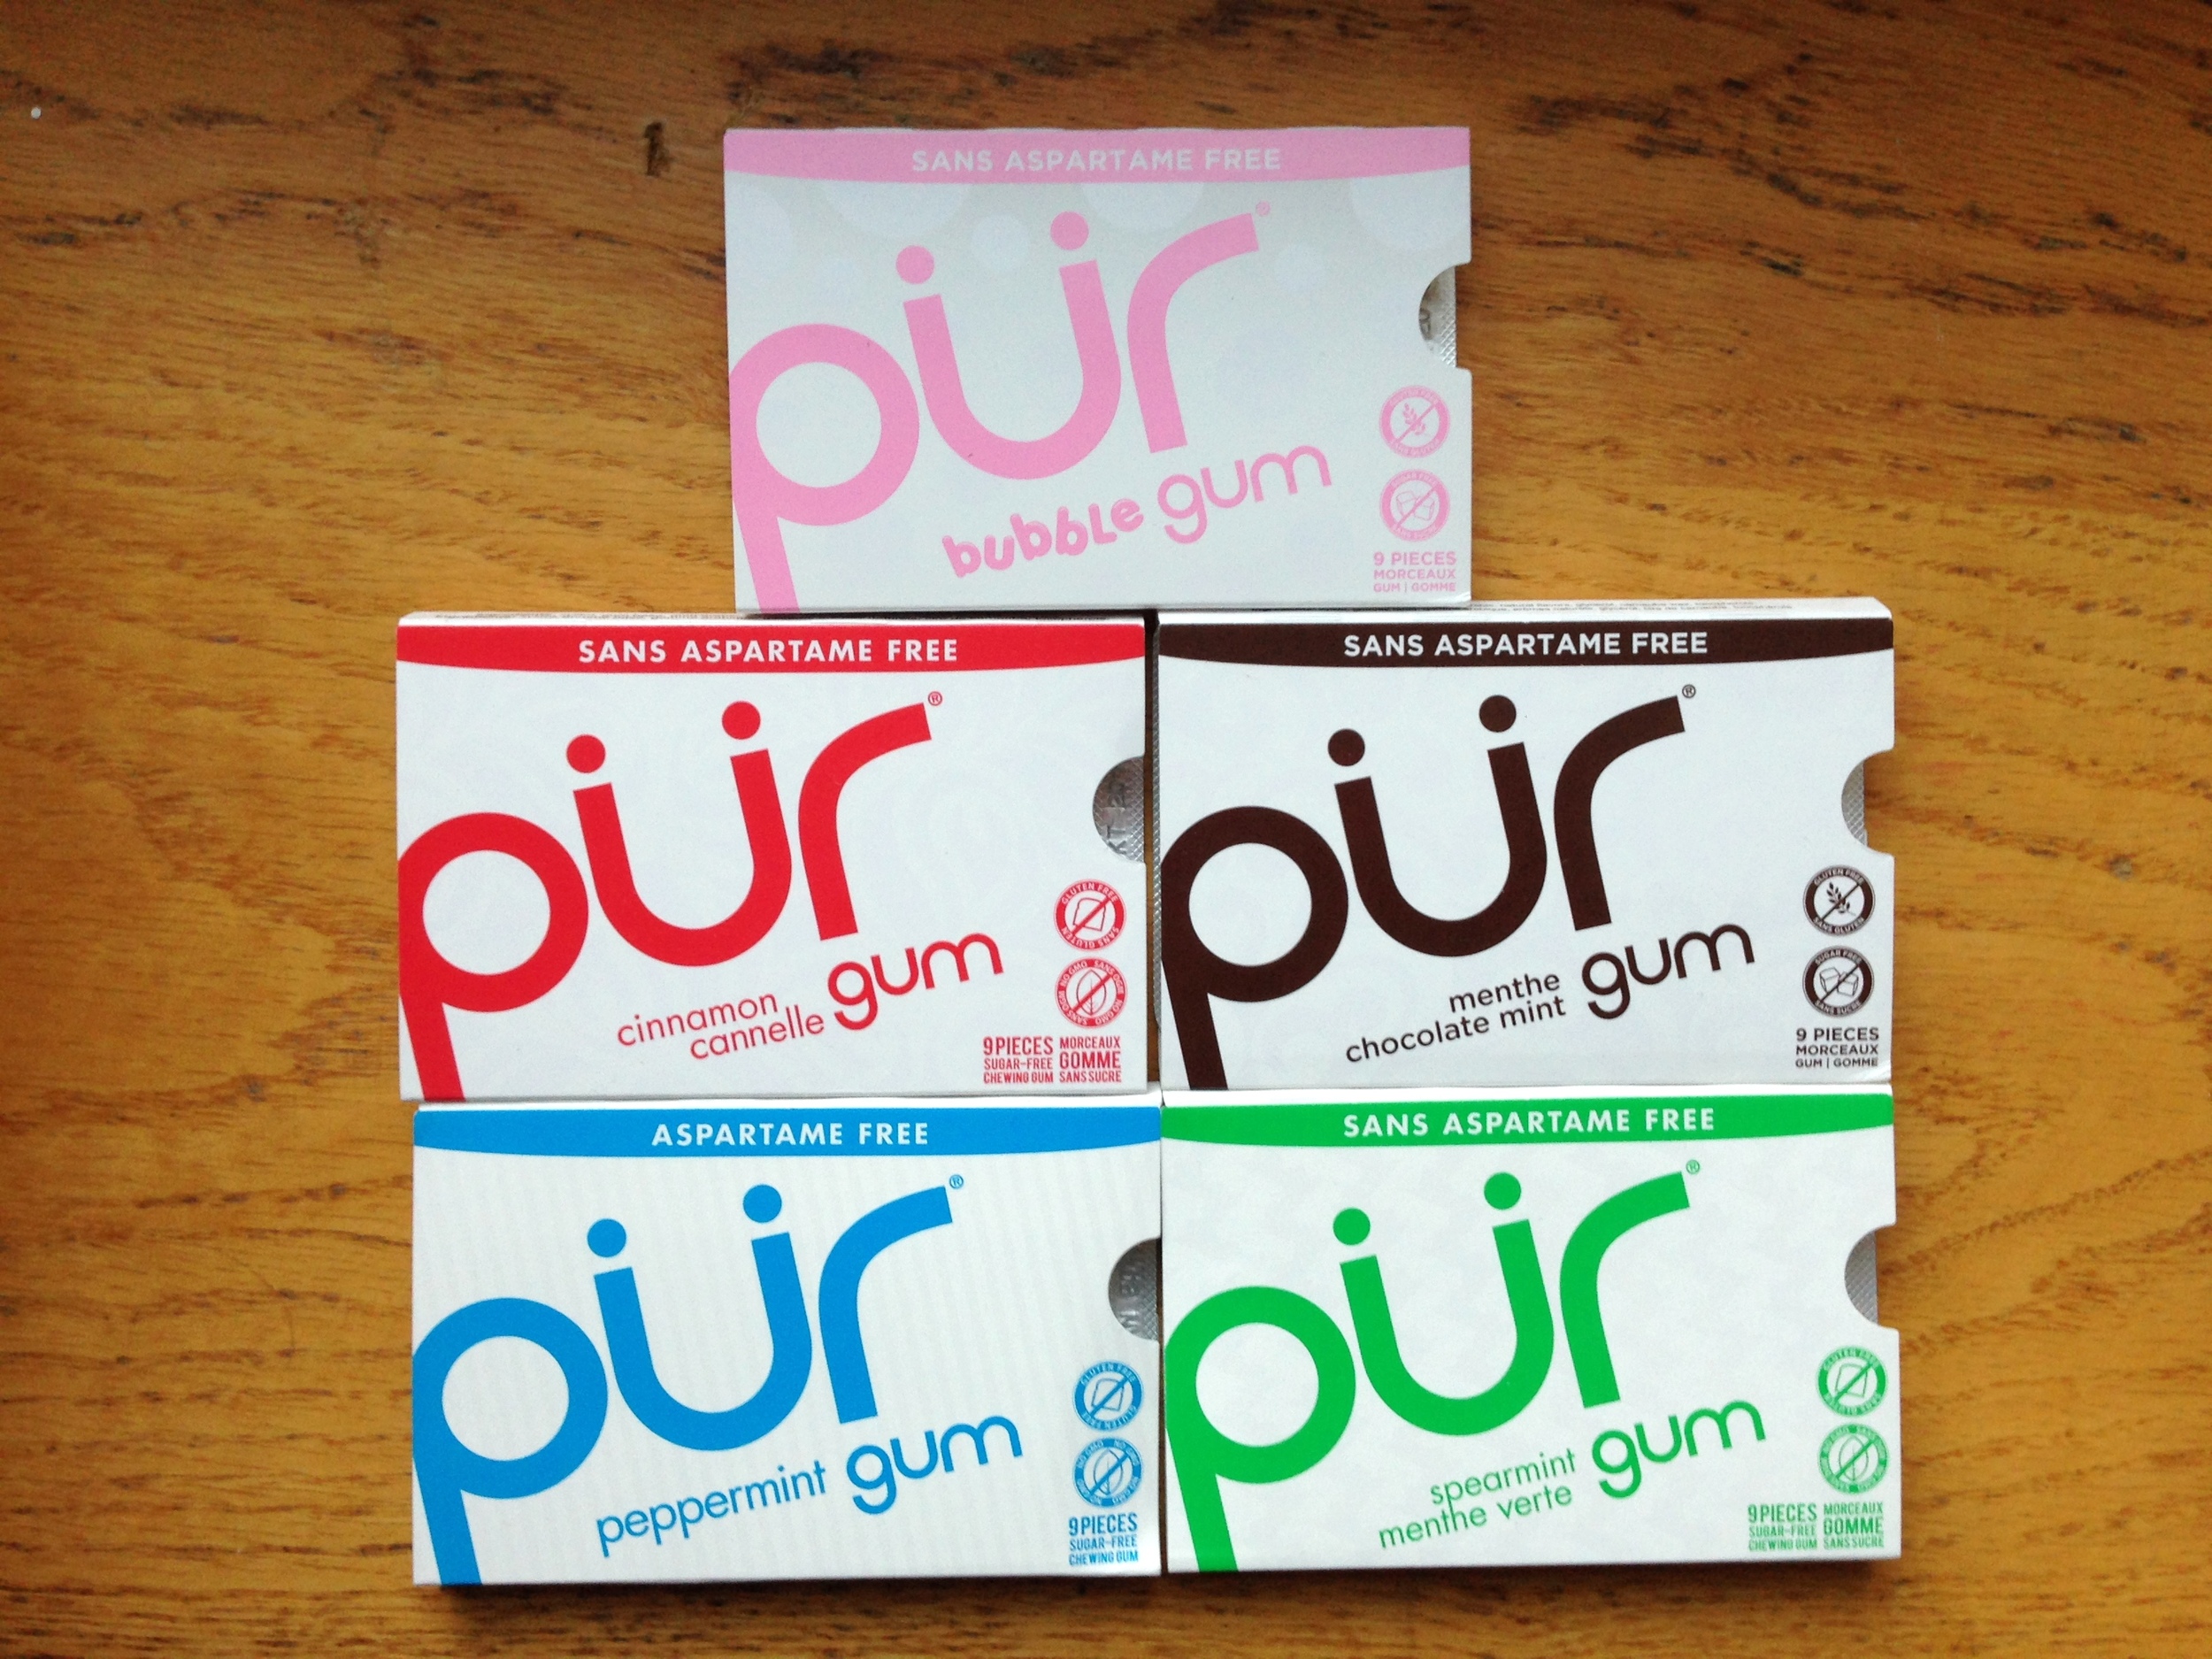 saying bye to weird ingredients with PUR gum — NANCY CHEN